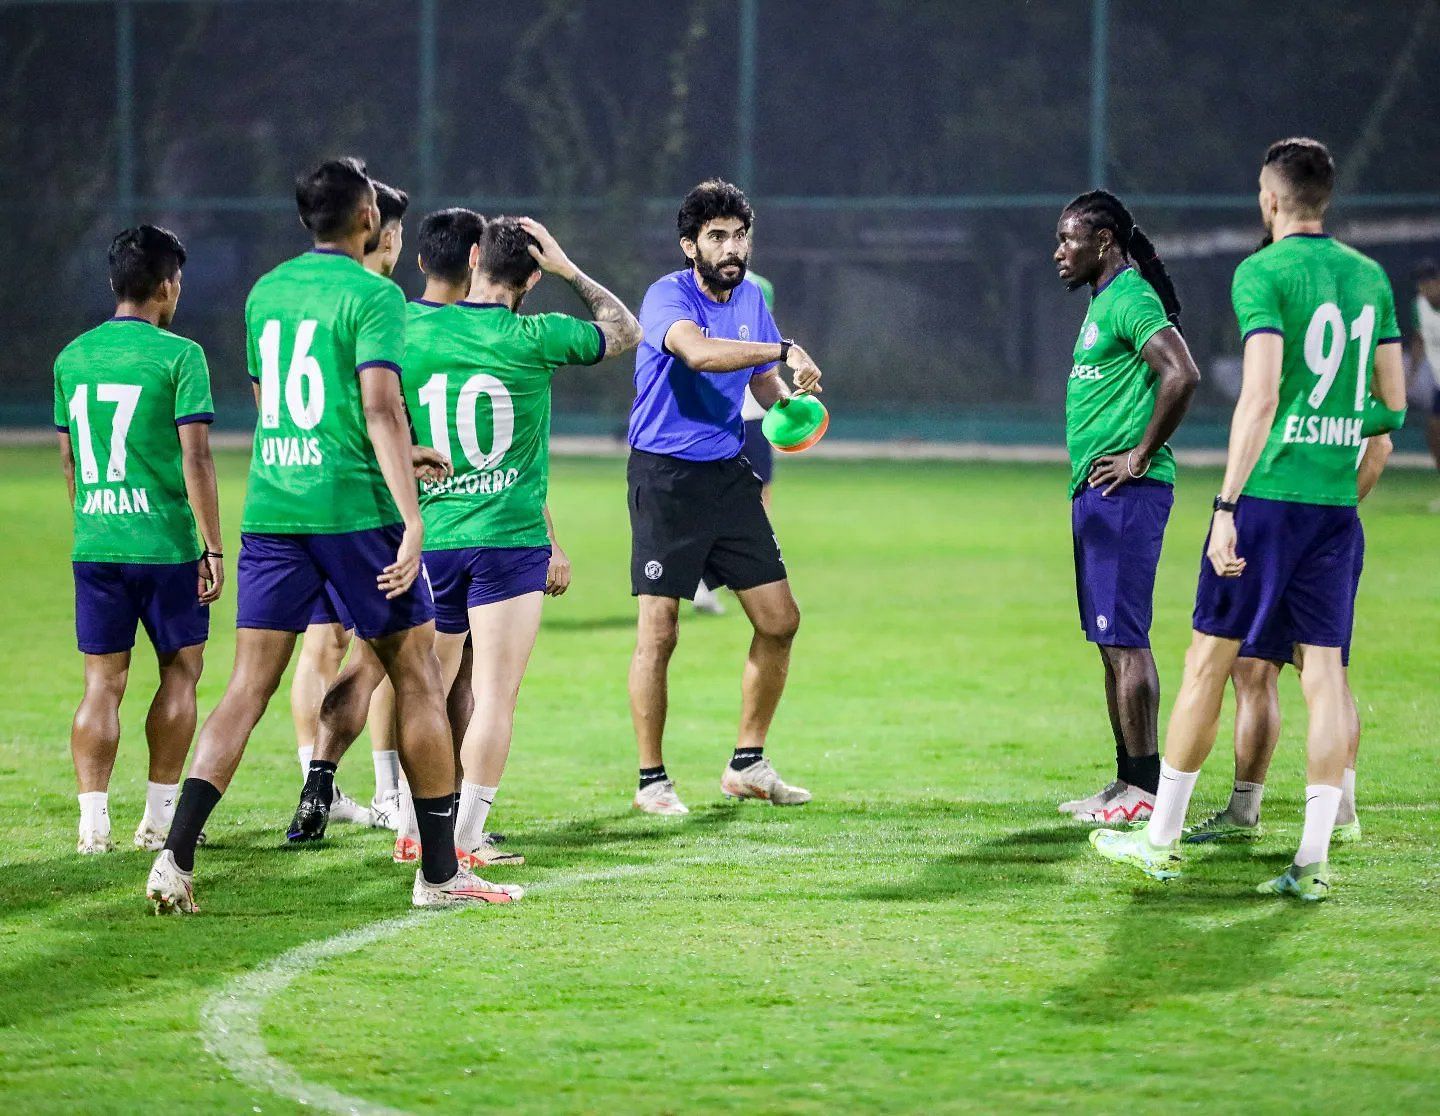 Coach Jamil leading a training session of Jamshedpur FC.